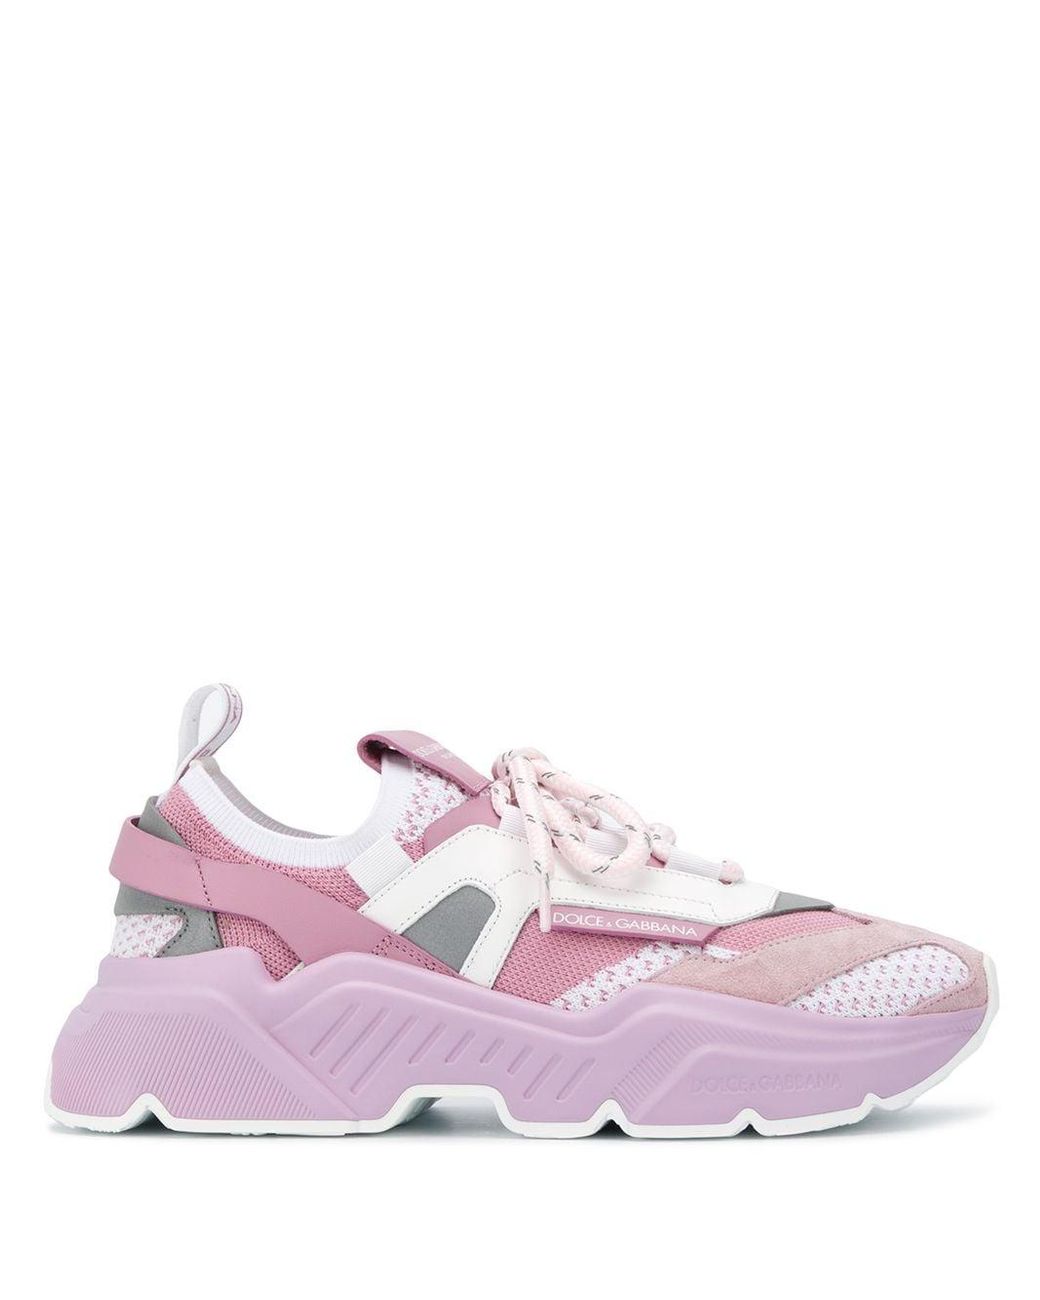 Dolce & Gabbana Leather Stretch Mesh Daymaster Sneakers in Pink | Lyst